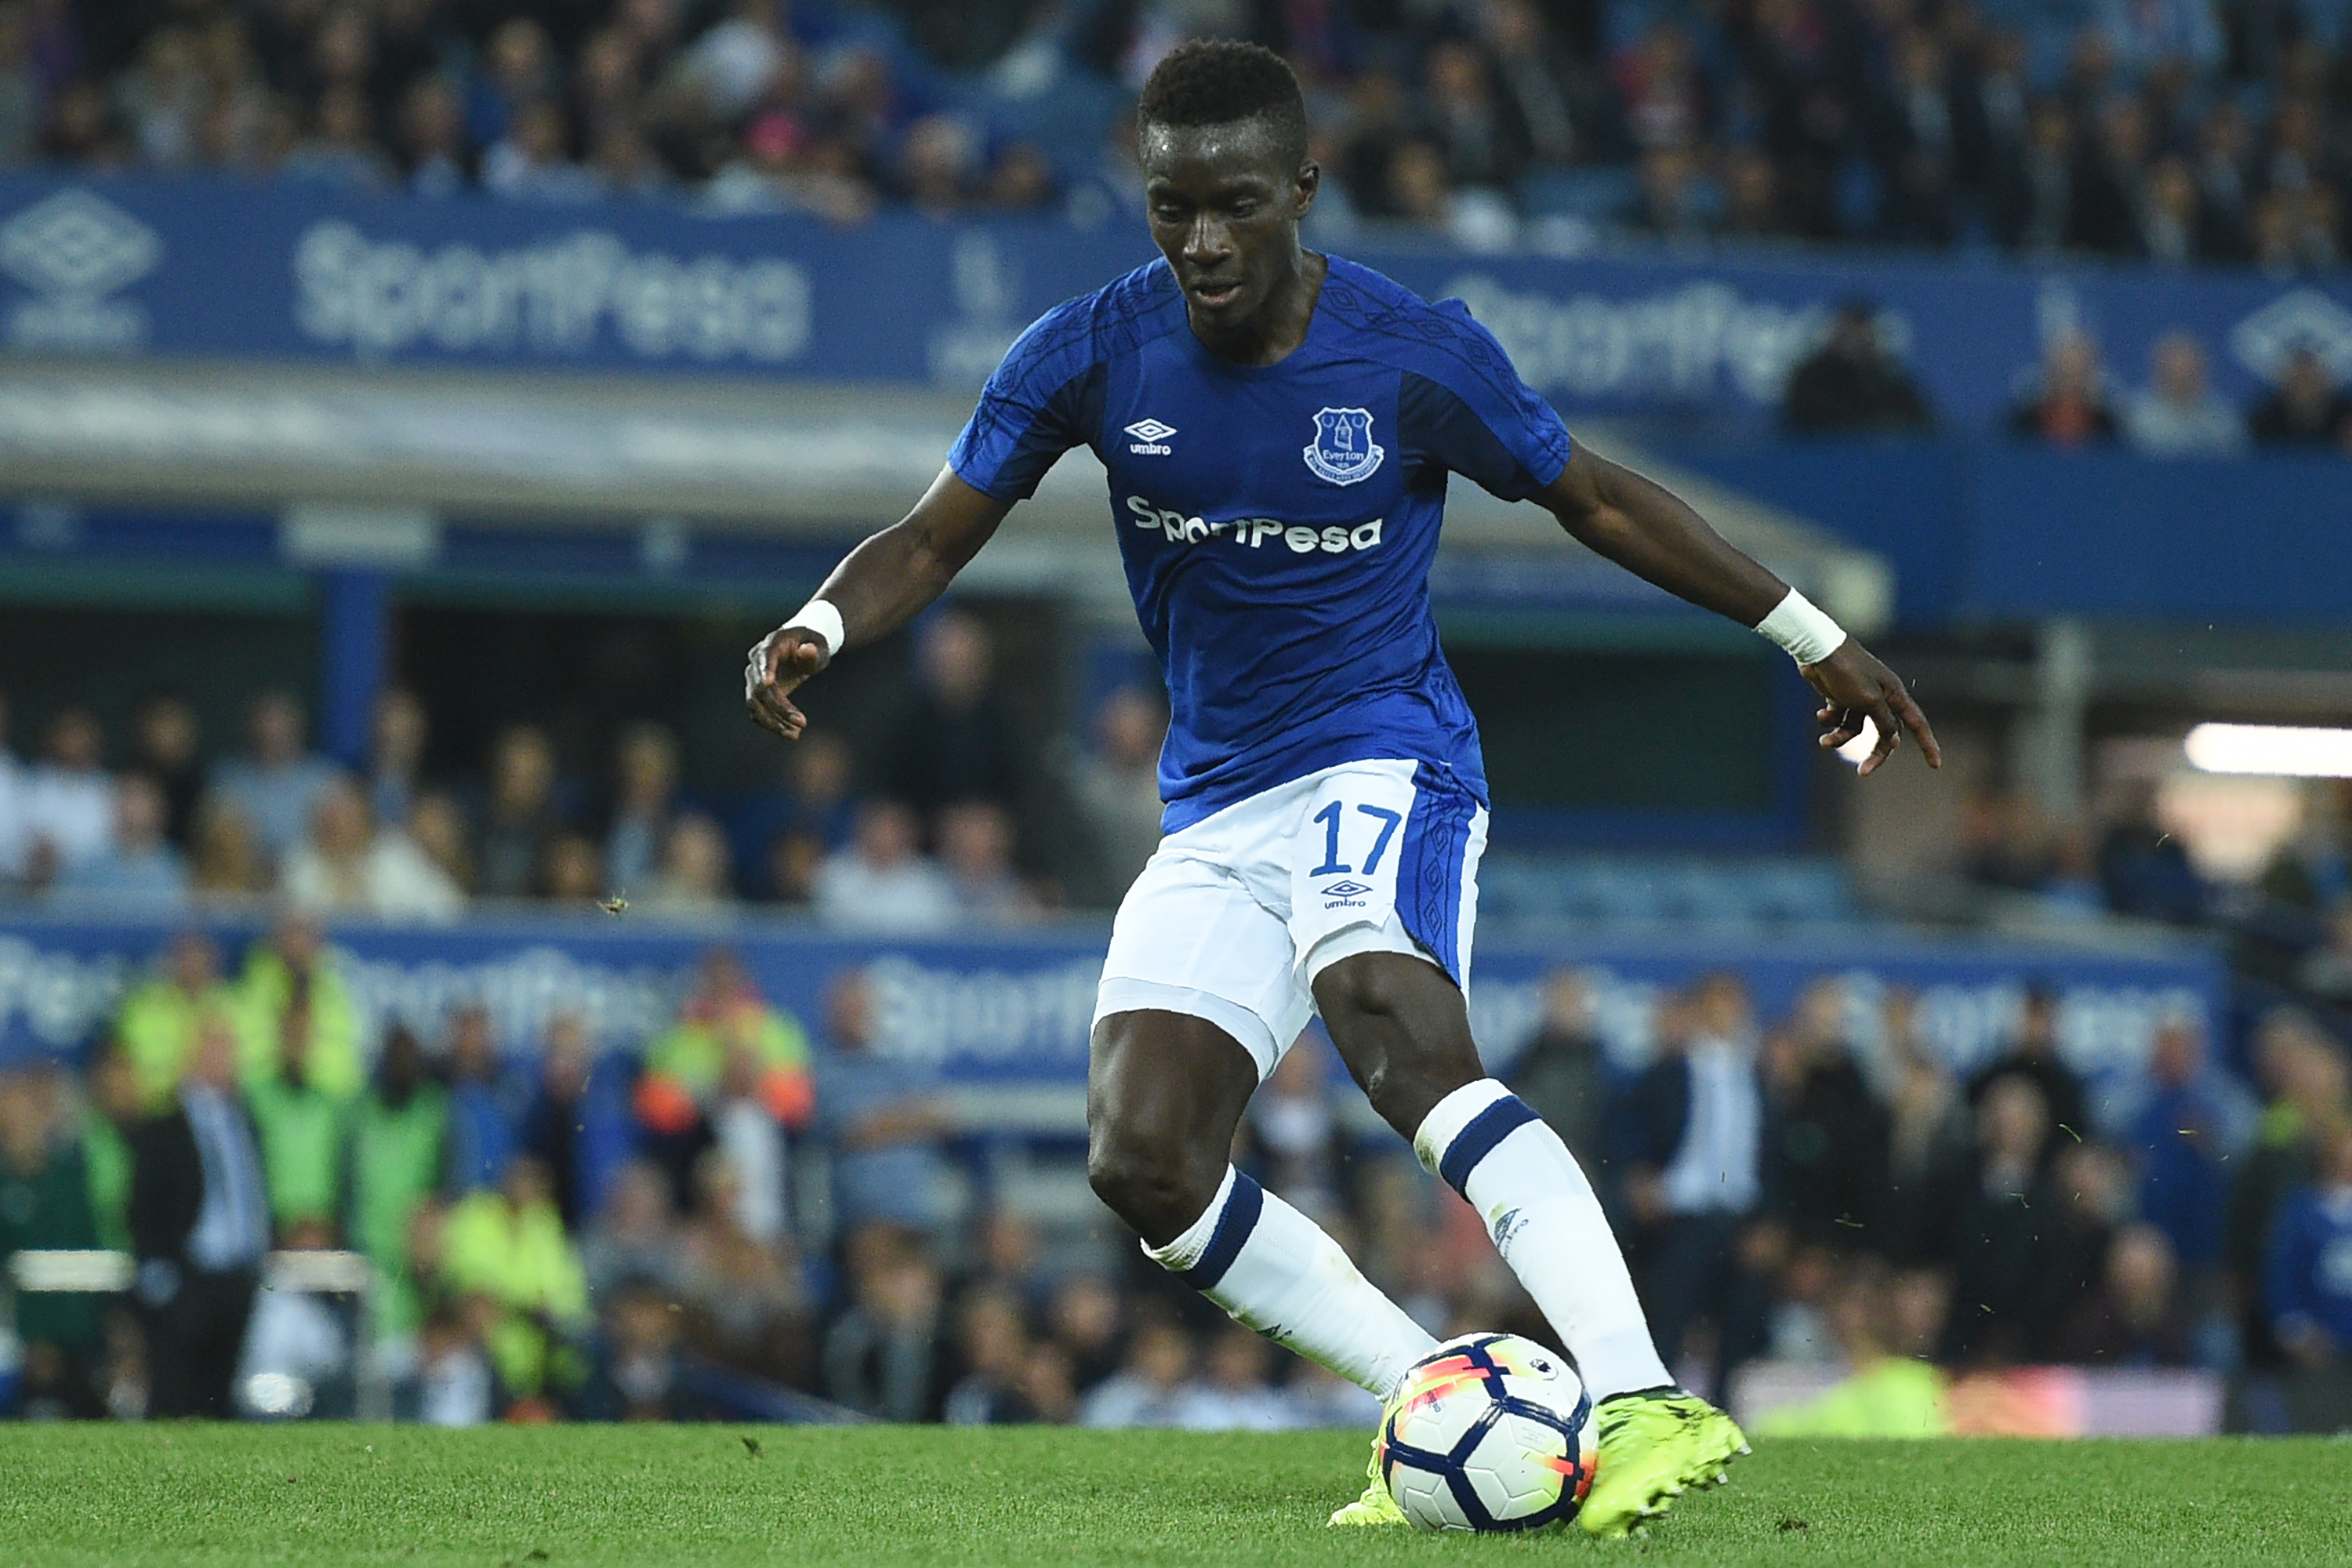 Everton's Senegalese midfielder Idrissa Gueye shoots to score their second goal during the UEFA Europa League playoff round, first leg football match between Everton and Hajduk Split at Goodison Park in Liverpool, north west England on August 17, 2017. / AFP PHOTO / Oli SCARFF (Photo credit should read OLI SCARFF/AFP/Getty Images)